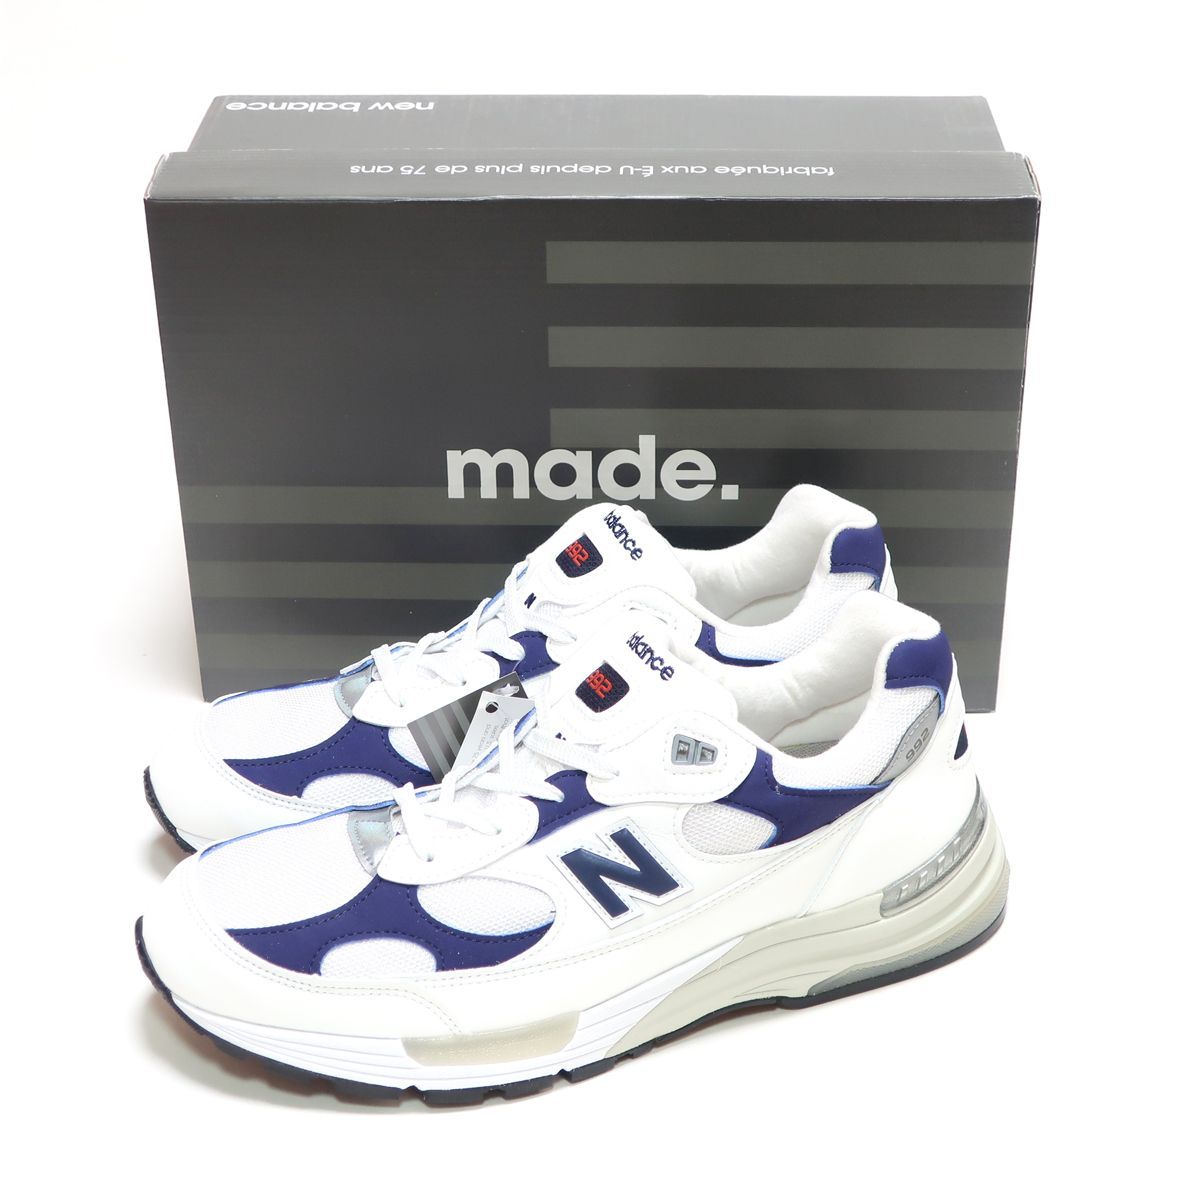 NEW BALANCE M992EC WHITE/BLUE MADE IN USA US12 30cm